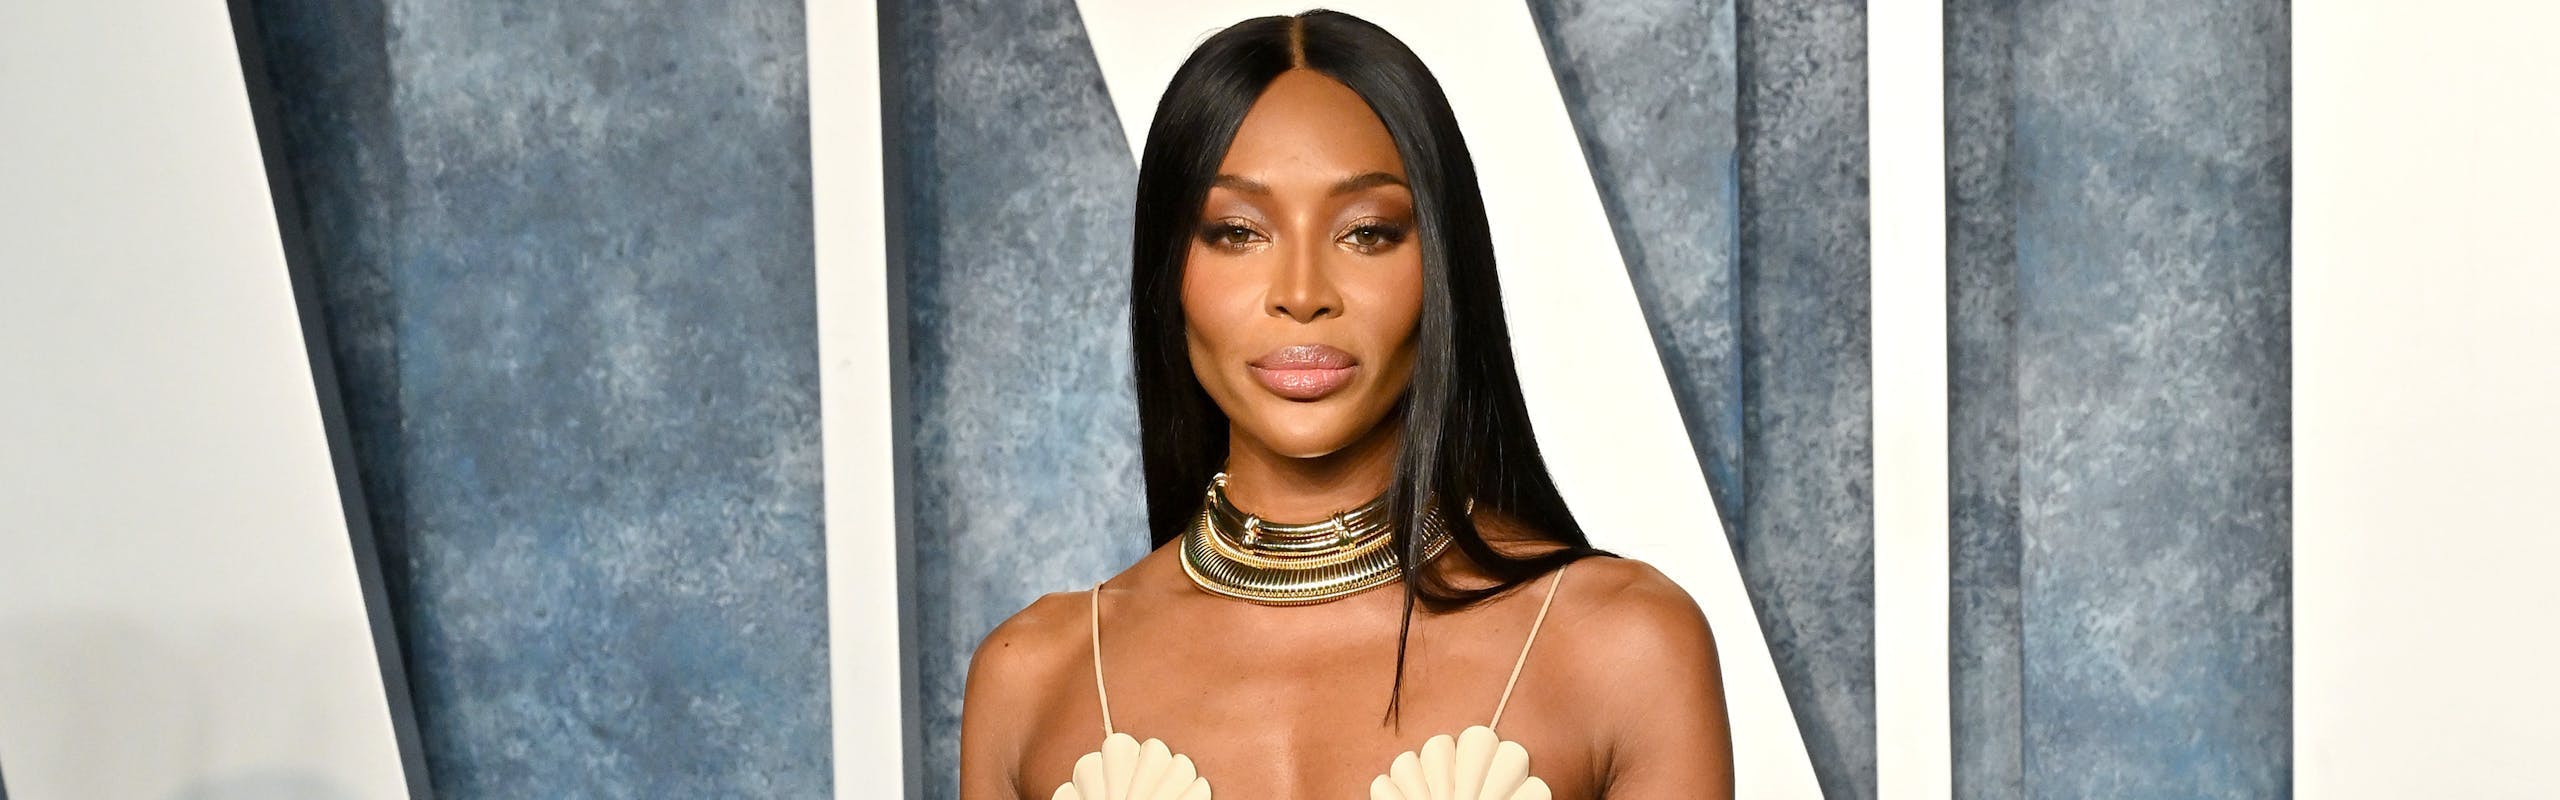 Naomi Campbell wears a white, long dress with tile detailing.